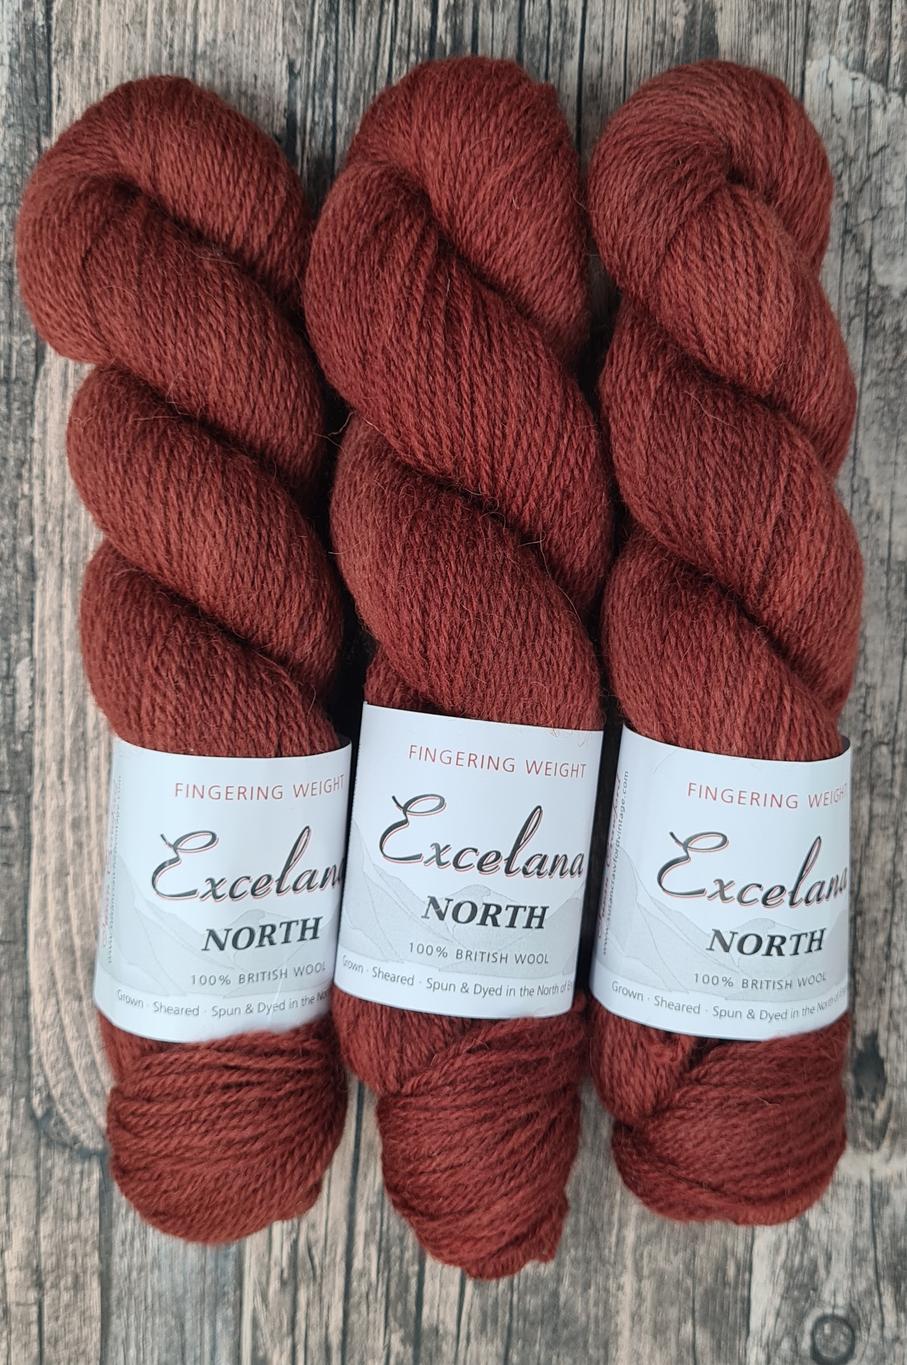 Excelana North Fingering Weight - Dock Seed